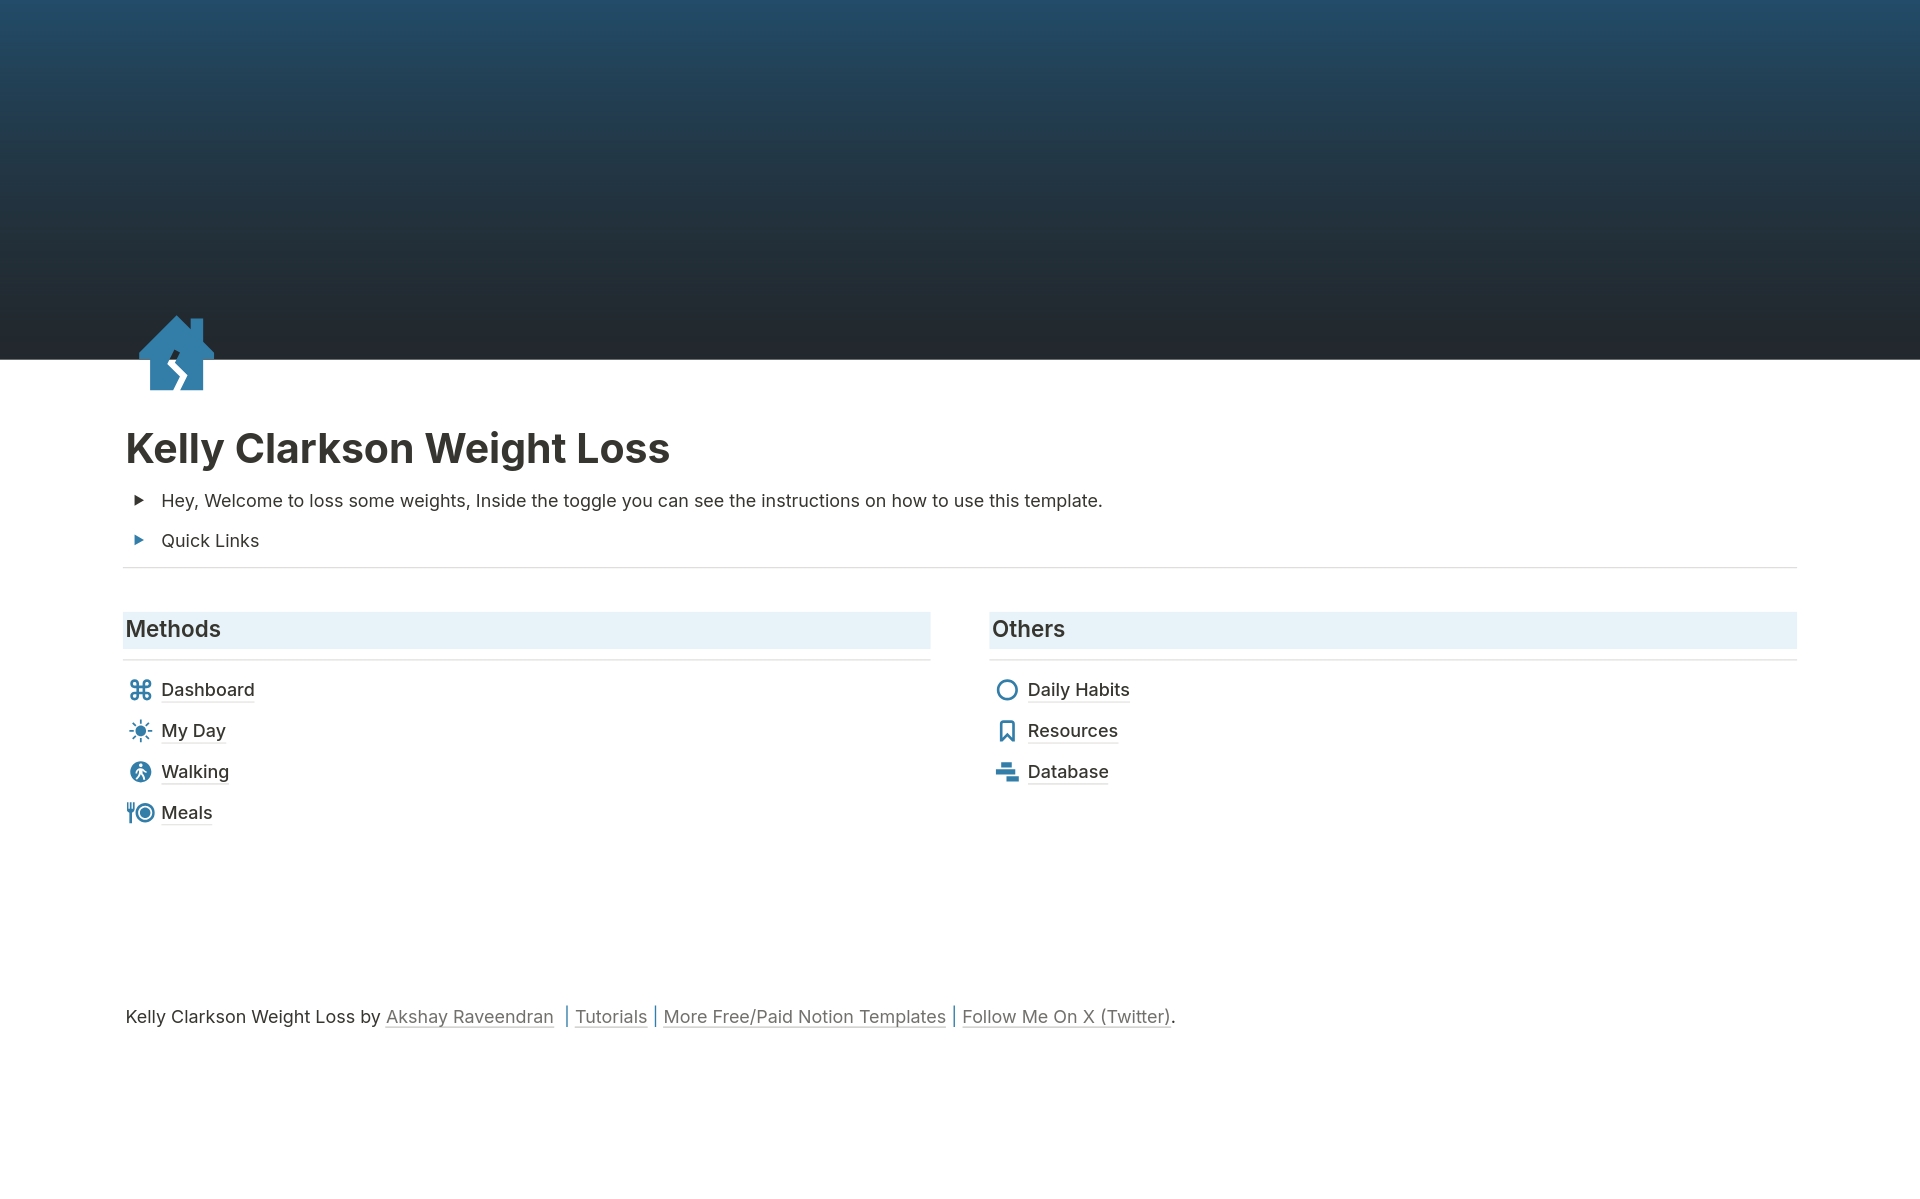 The Kelly Clarkson Weight Loss Method Notion Template™️ is a digital planner to help you lose weight by focusing on two key actions: walking and eating high-protein meals.

Inspired by Kelly Clarkson's weight loss success.